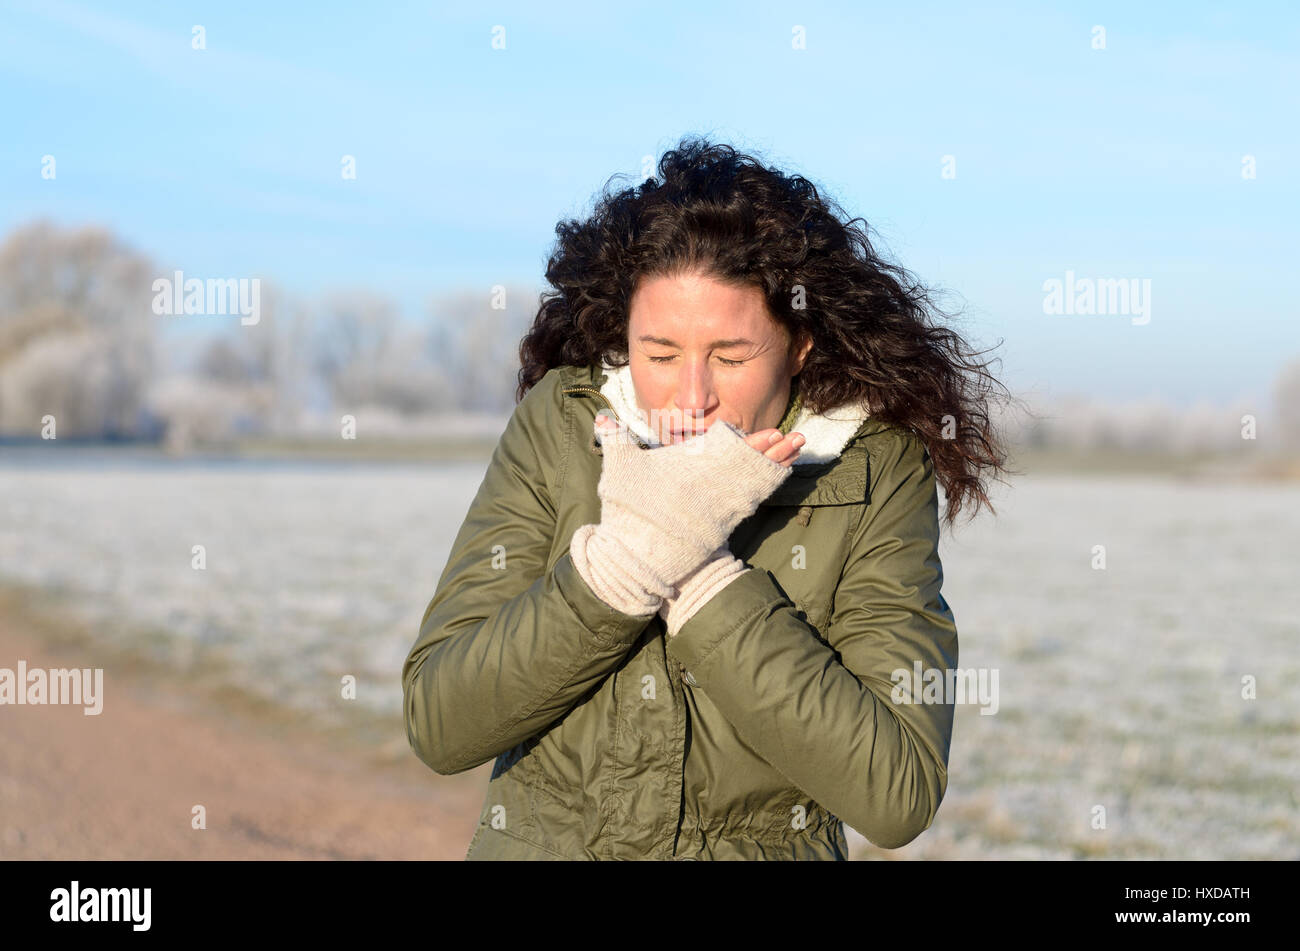 Young woman with a seasonal cold and flu coughing into her gloved hand as she stands on a rural road in a cold frosted winter landscape in sunshine, c Stock Photo